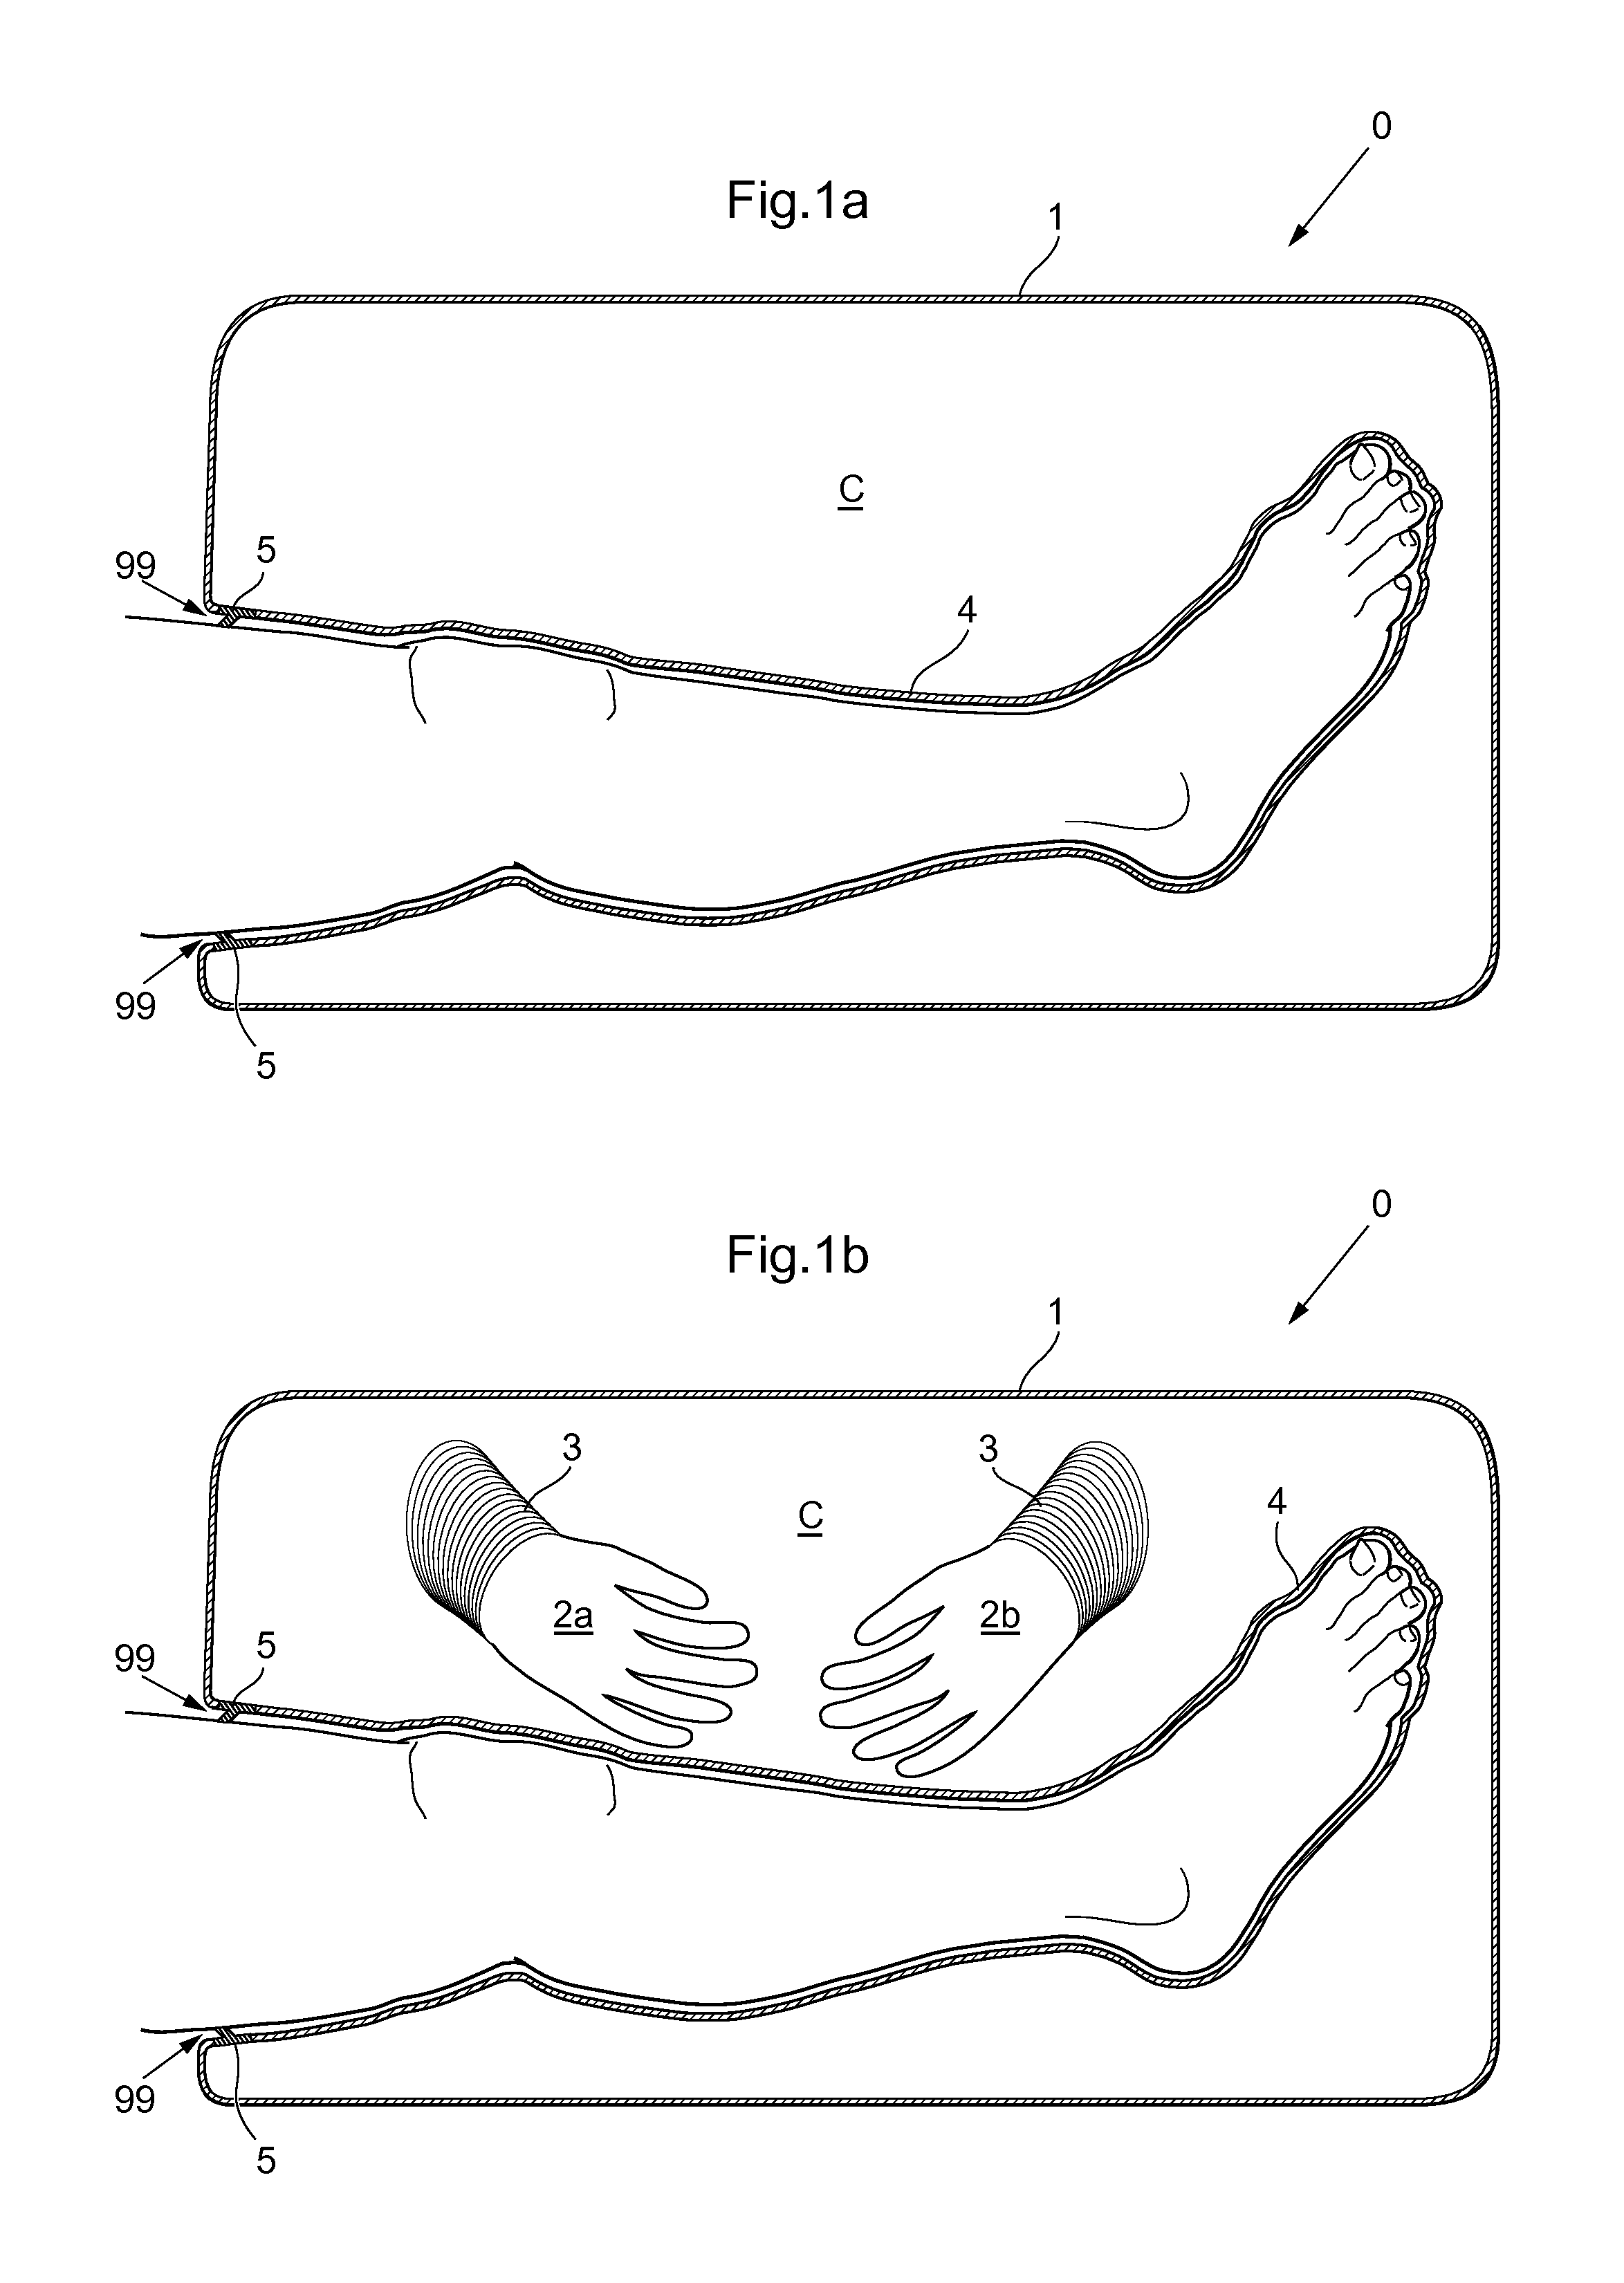 Surgical assisting device